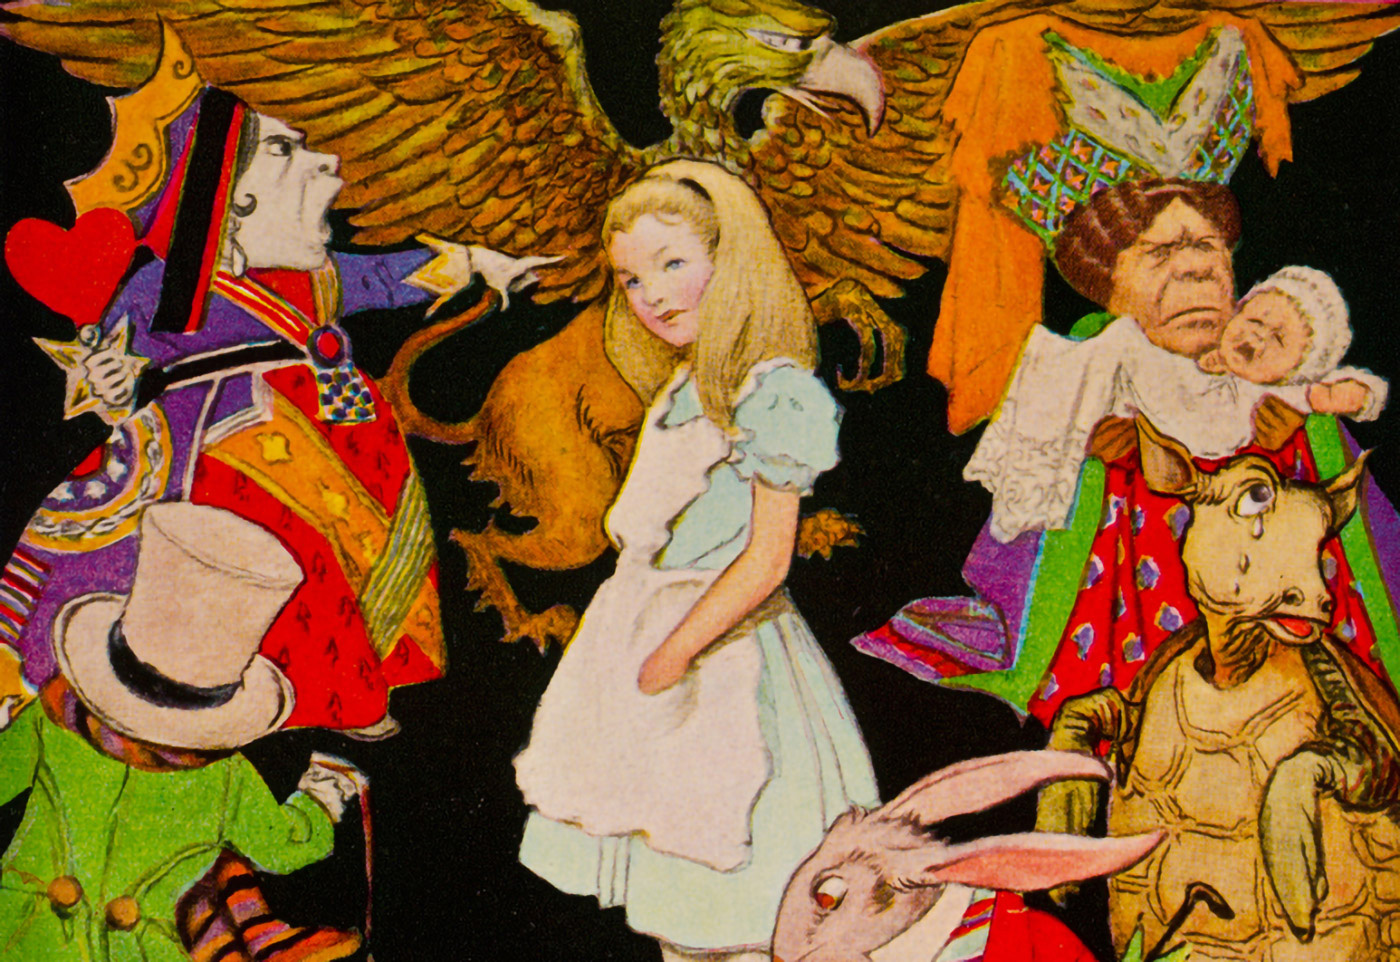 https://planetwordmuseum.org/wp-content/uploads/2022/07/Boys_and_Girls_of_Bookland_Alice_in_Wonderland-small.jpg